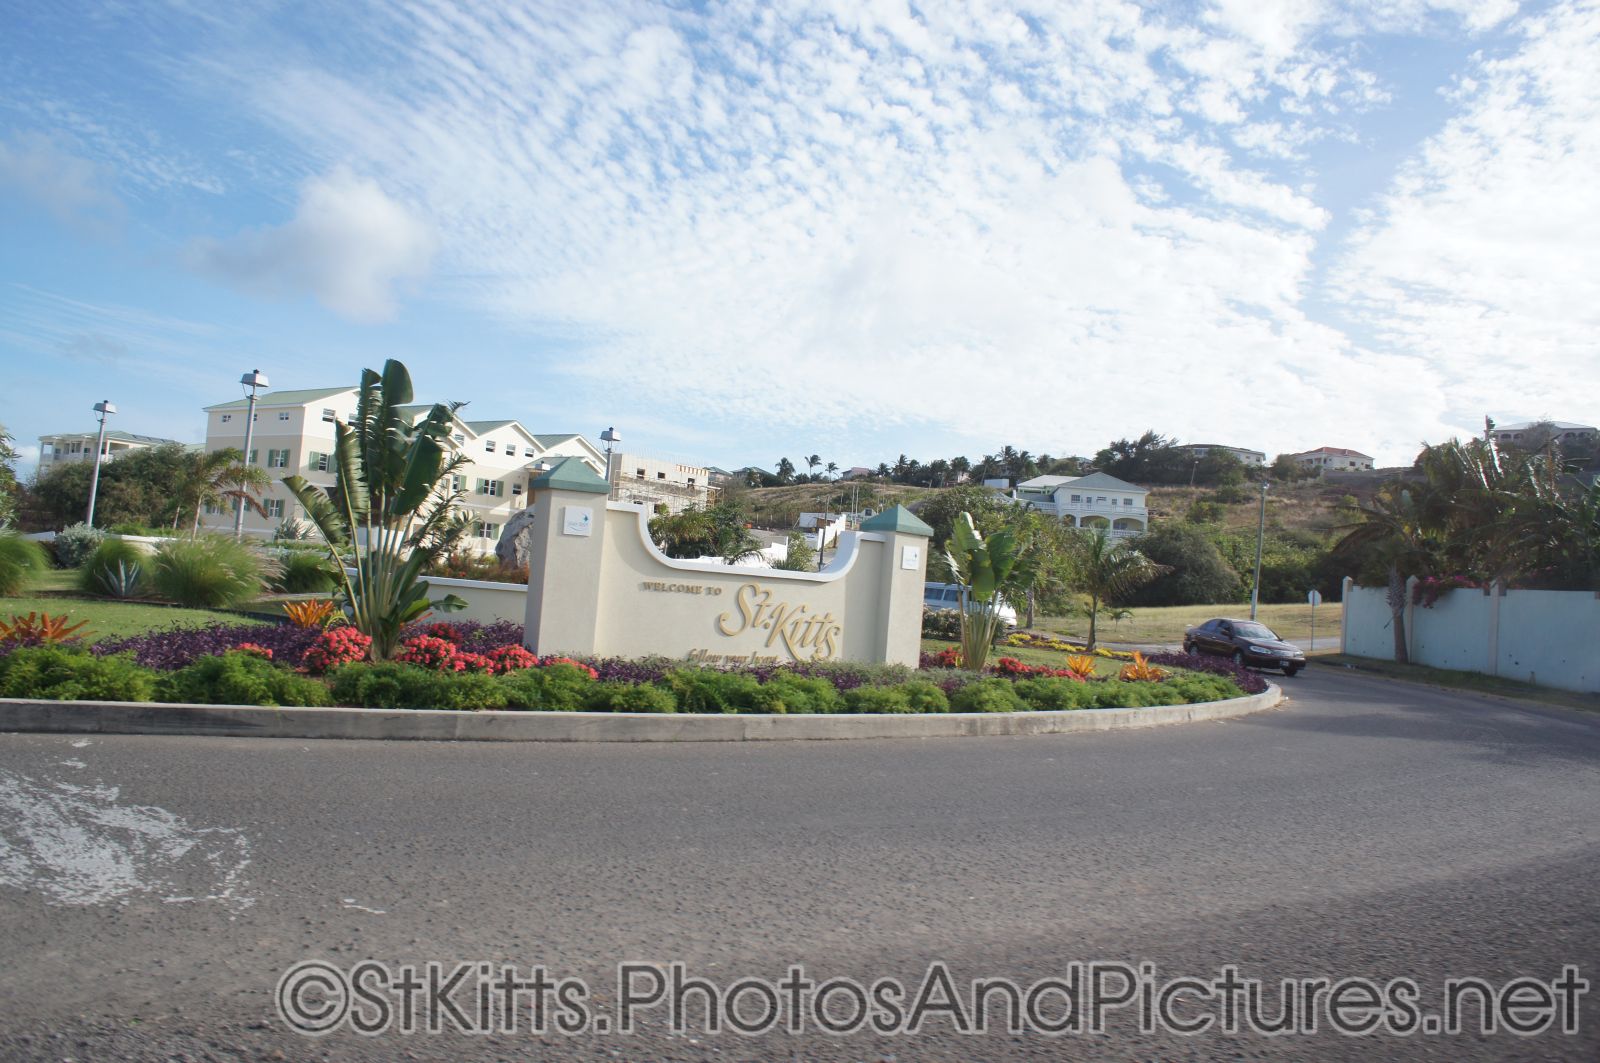 Welcome to St Kitts Follow Your Heart sign.jpg
